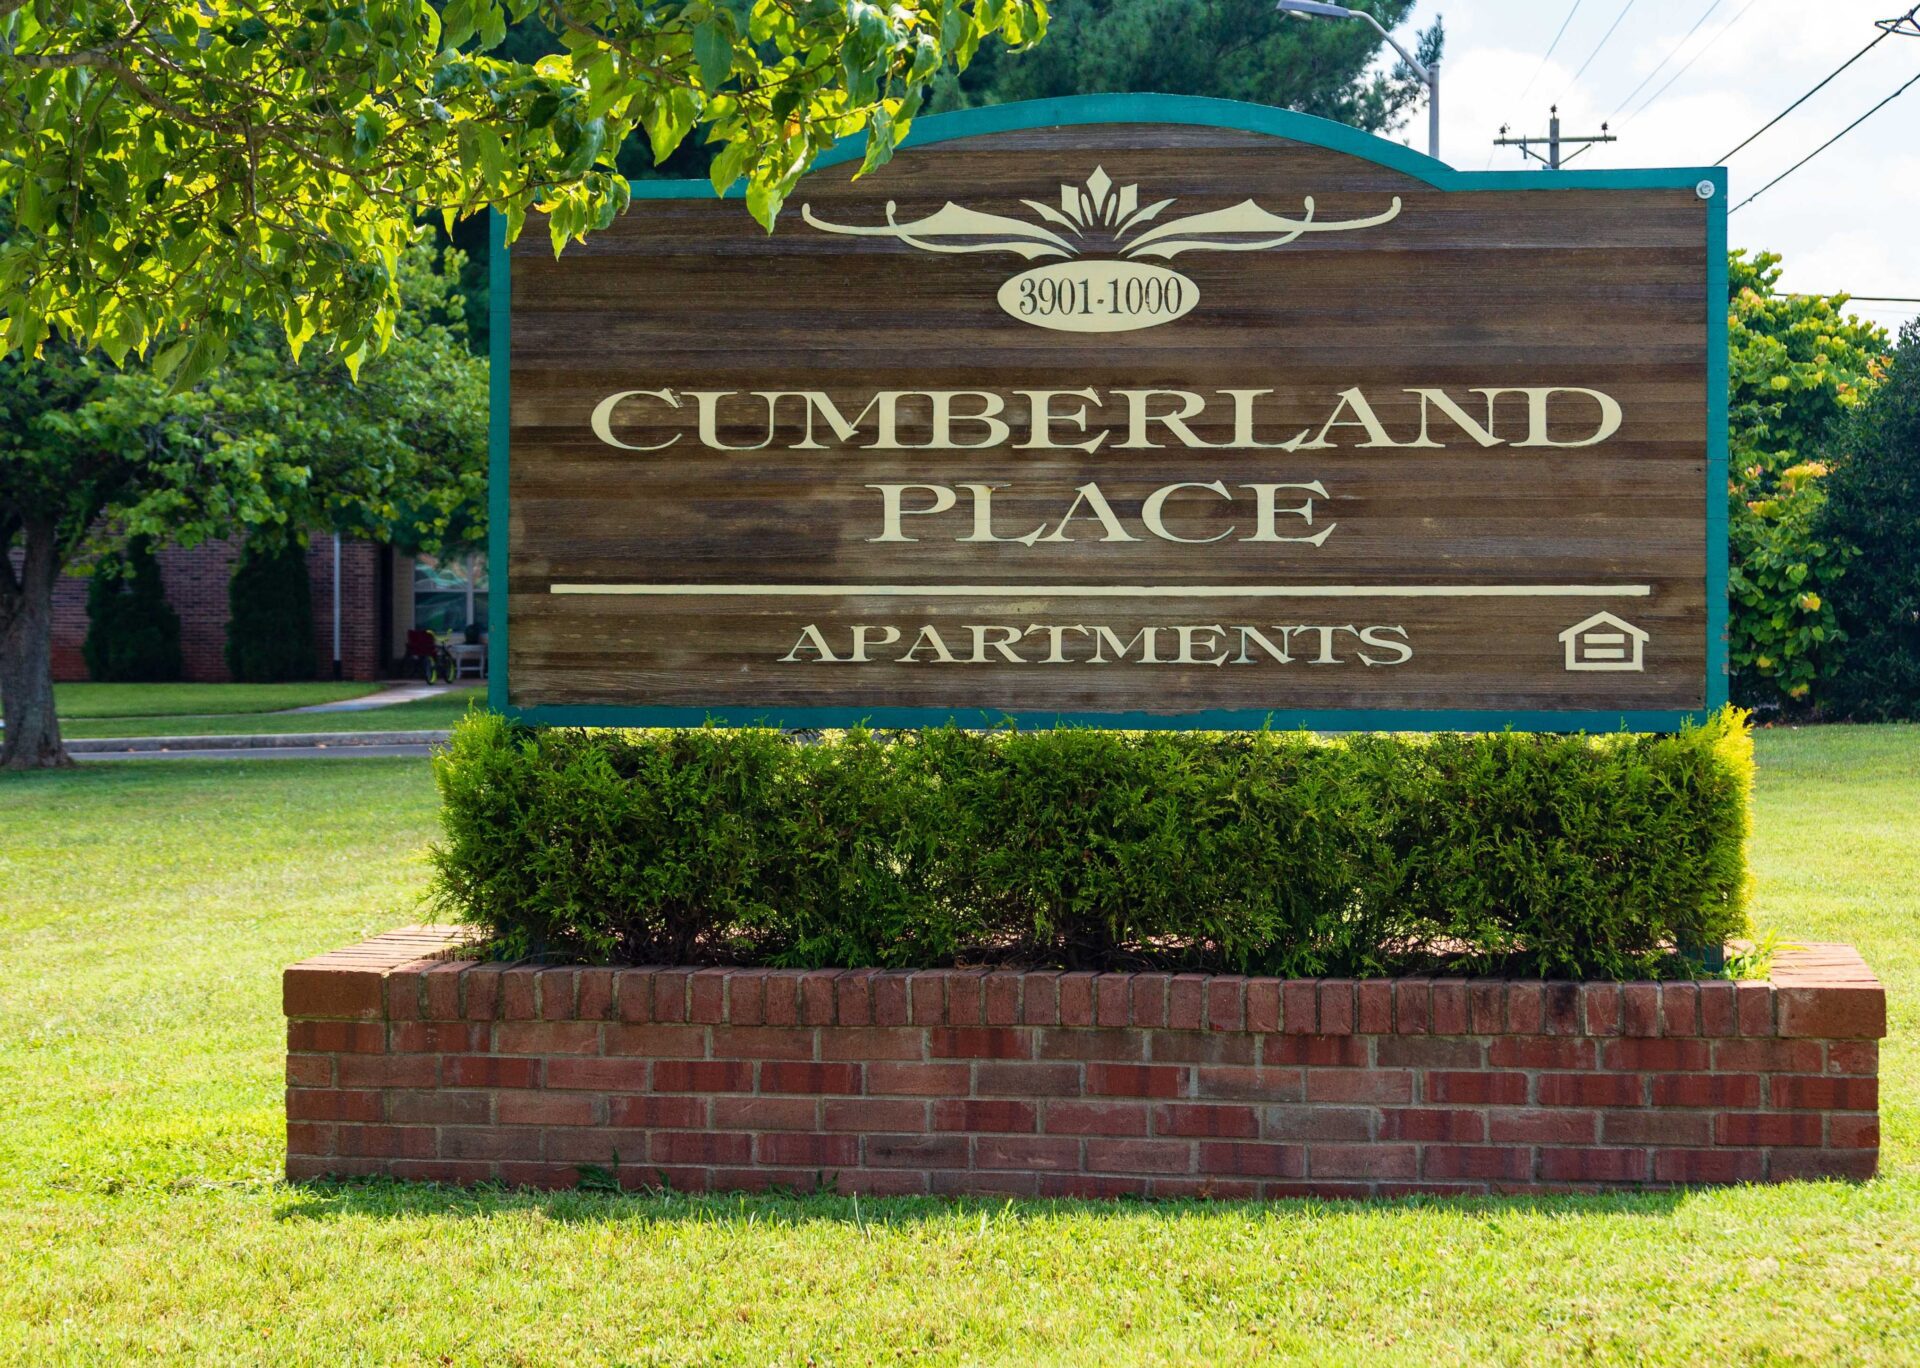 CUMBERLAND PLACE APARTMENTS